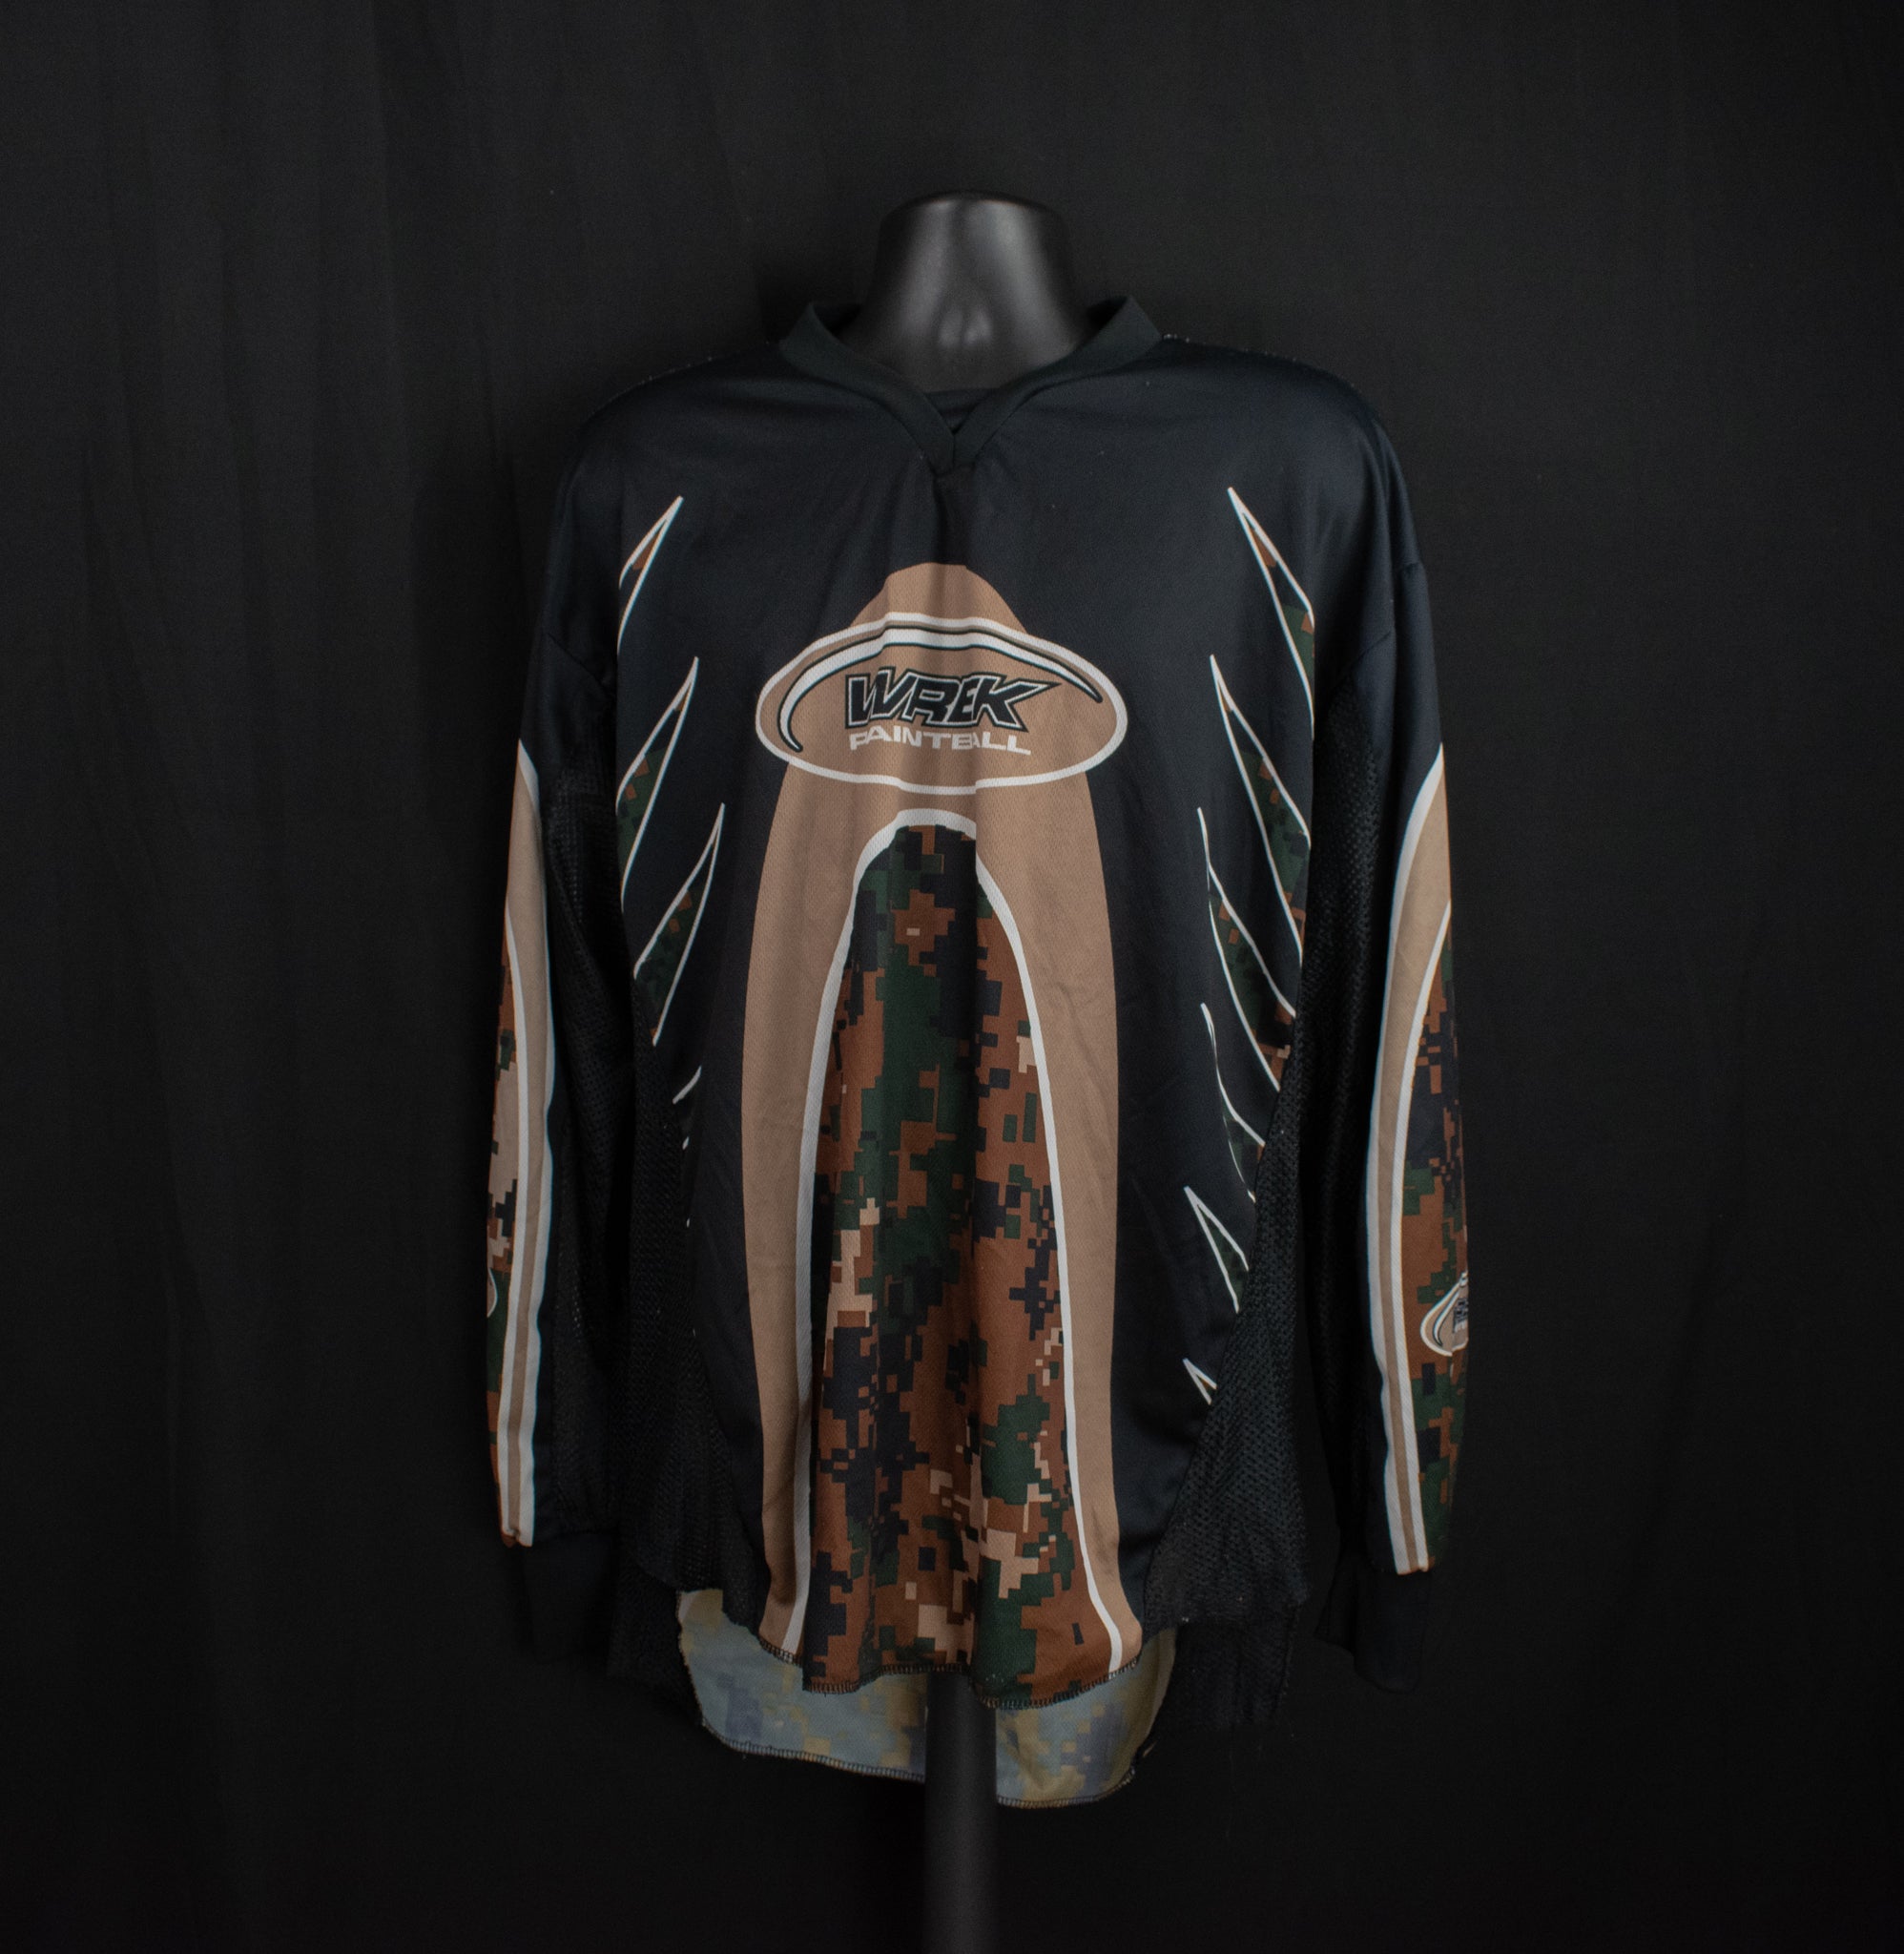 Wrek Paintball Camo Mens Adult Paintball Jersey Used X-Large